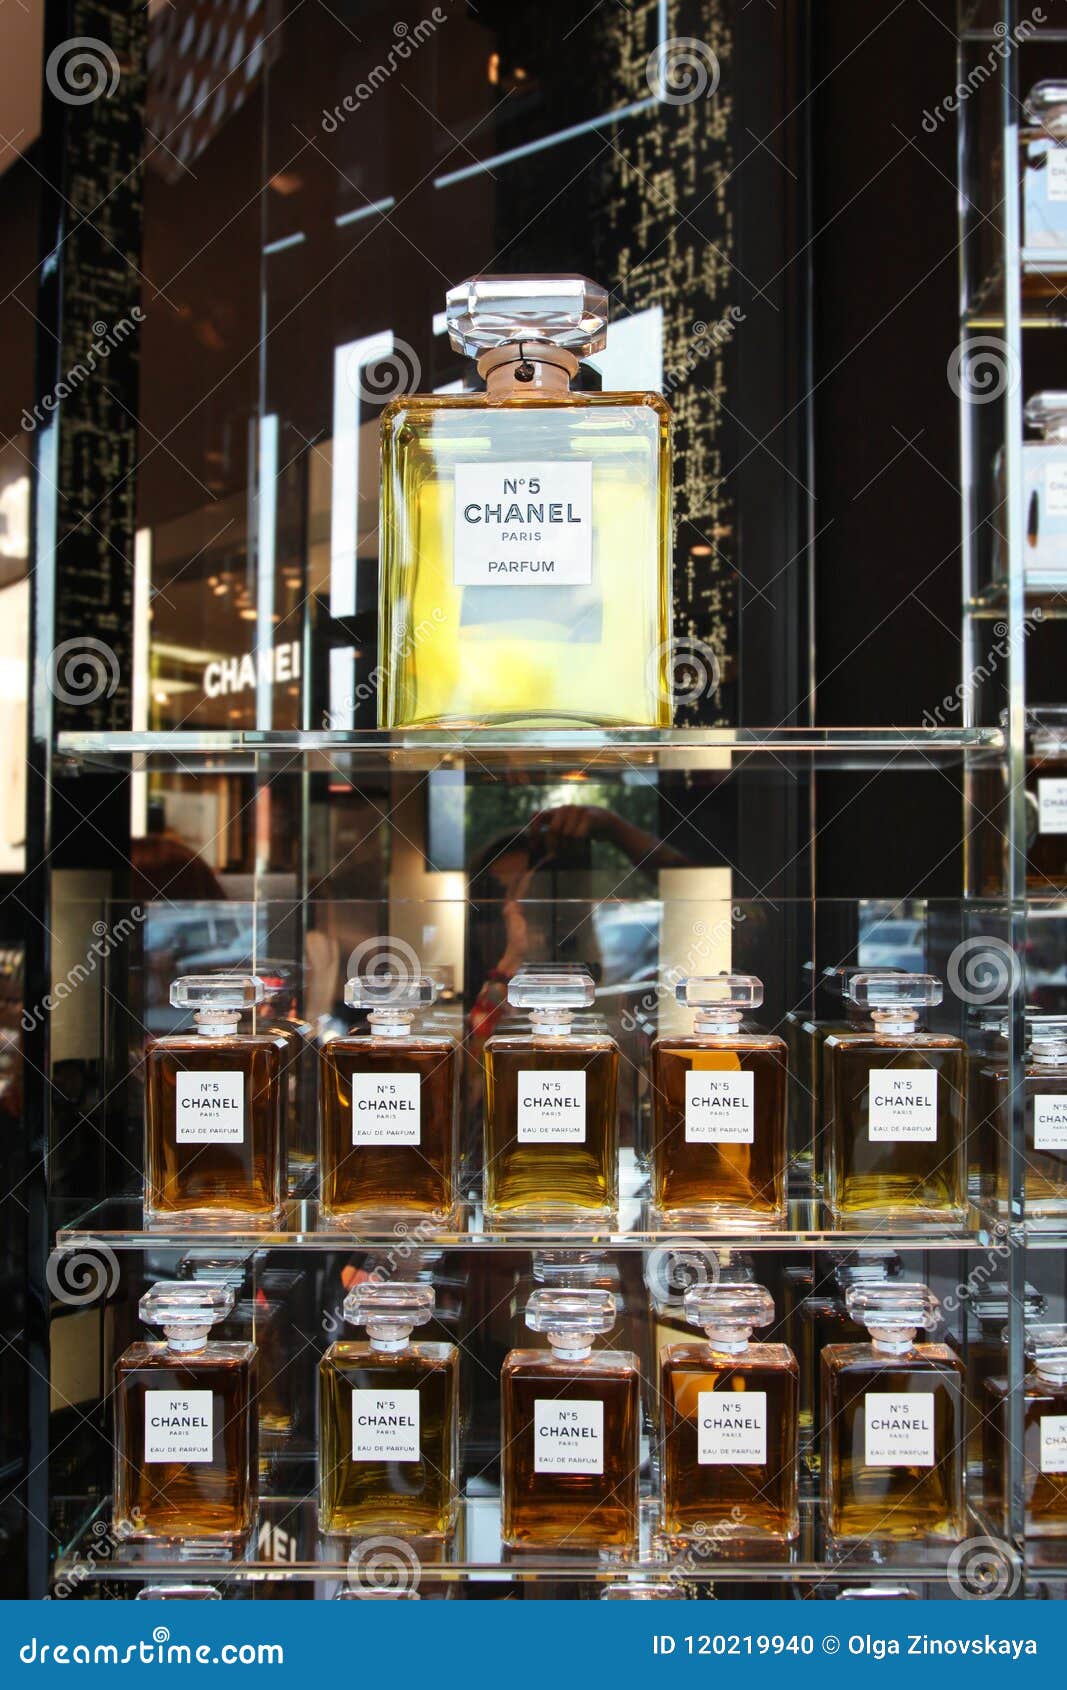 Showcase with Bottles of Perfume CHANEL â„– 5. Moscow. 24.07.2013 Editorial  Image - Image of bottle, luxury: 120219940